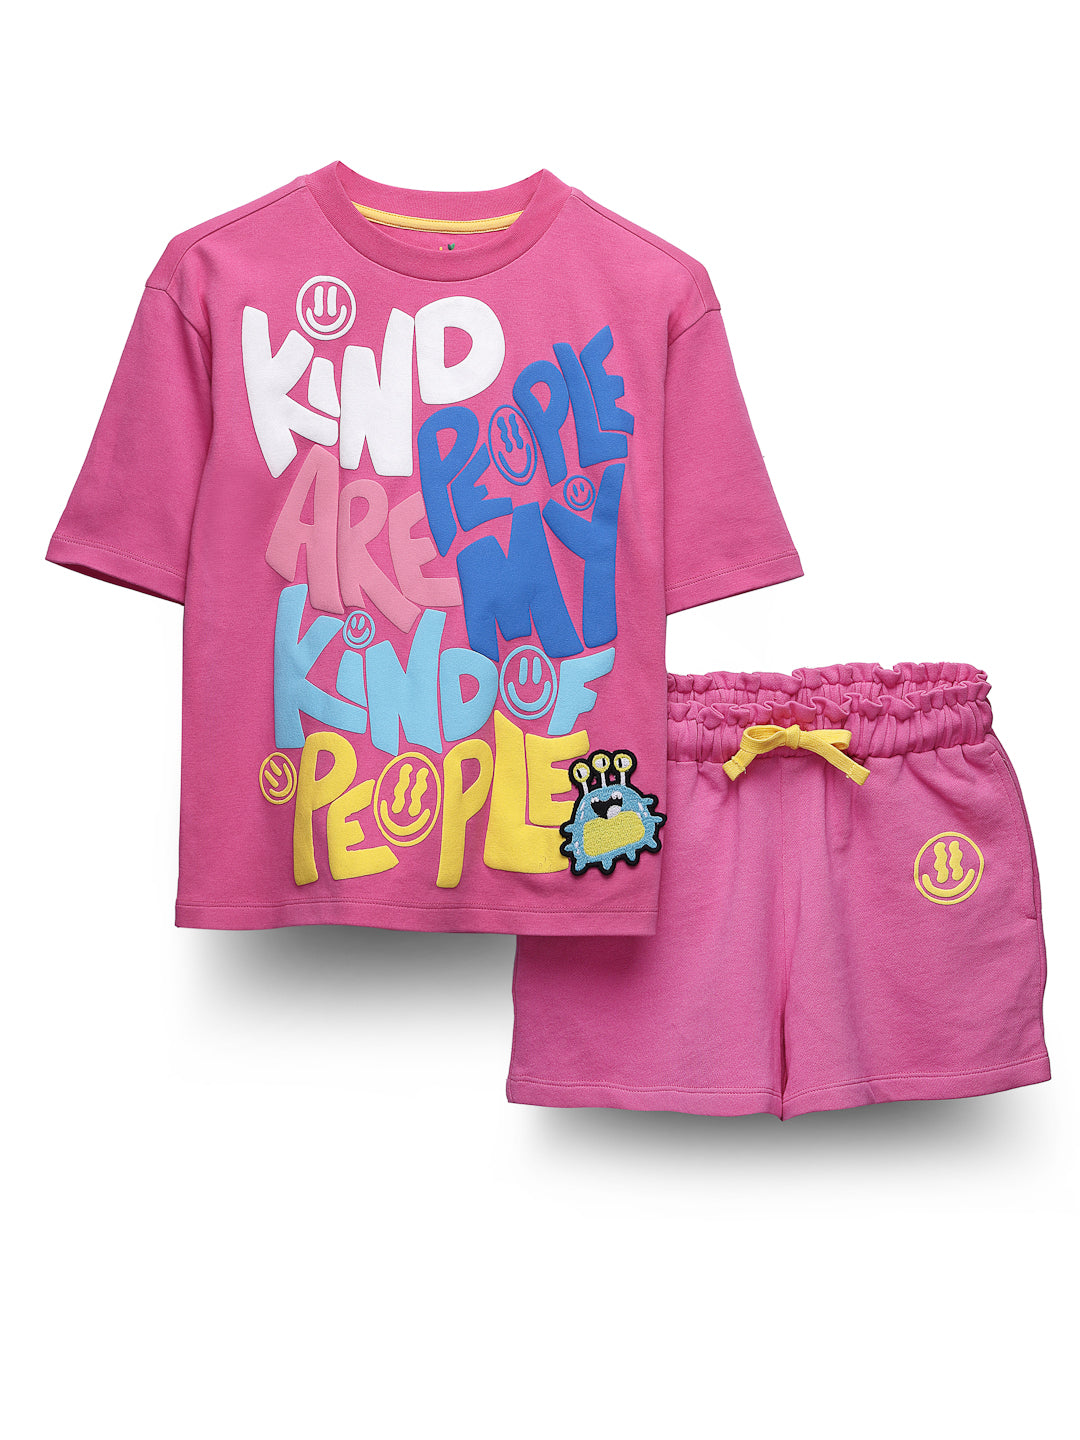 Jazzy pink front printed girl sets